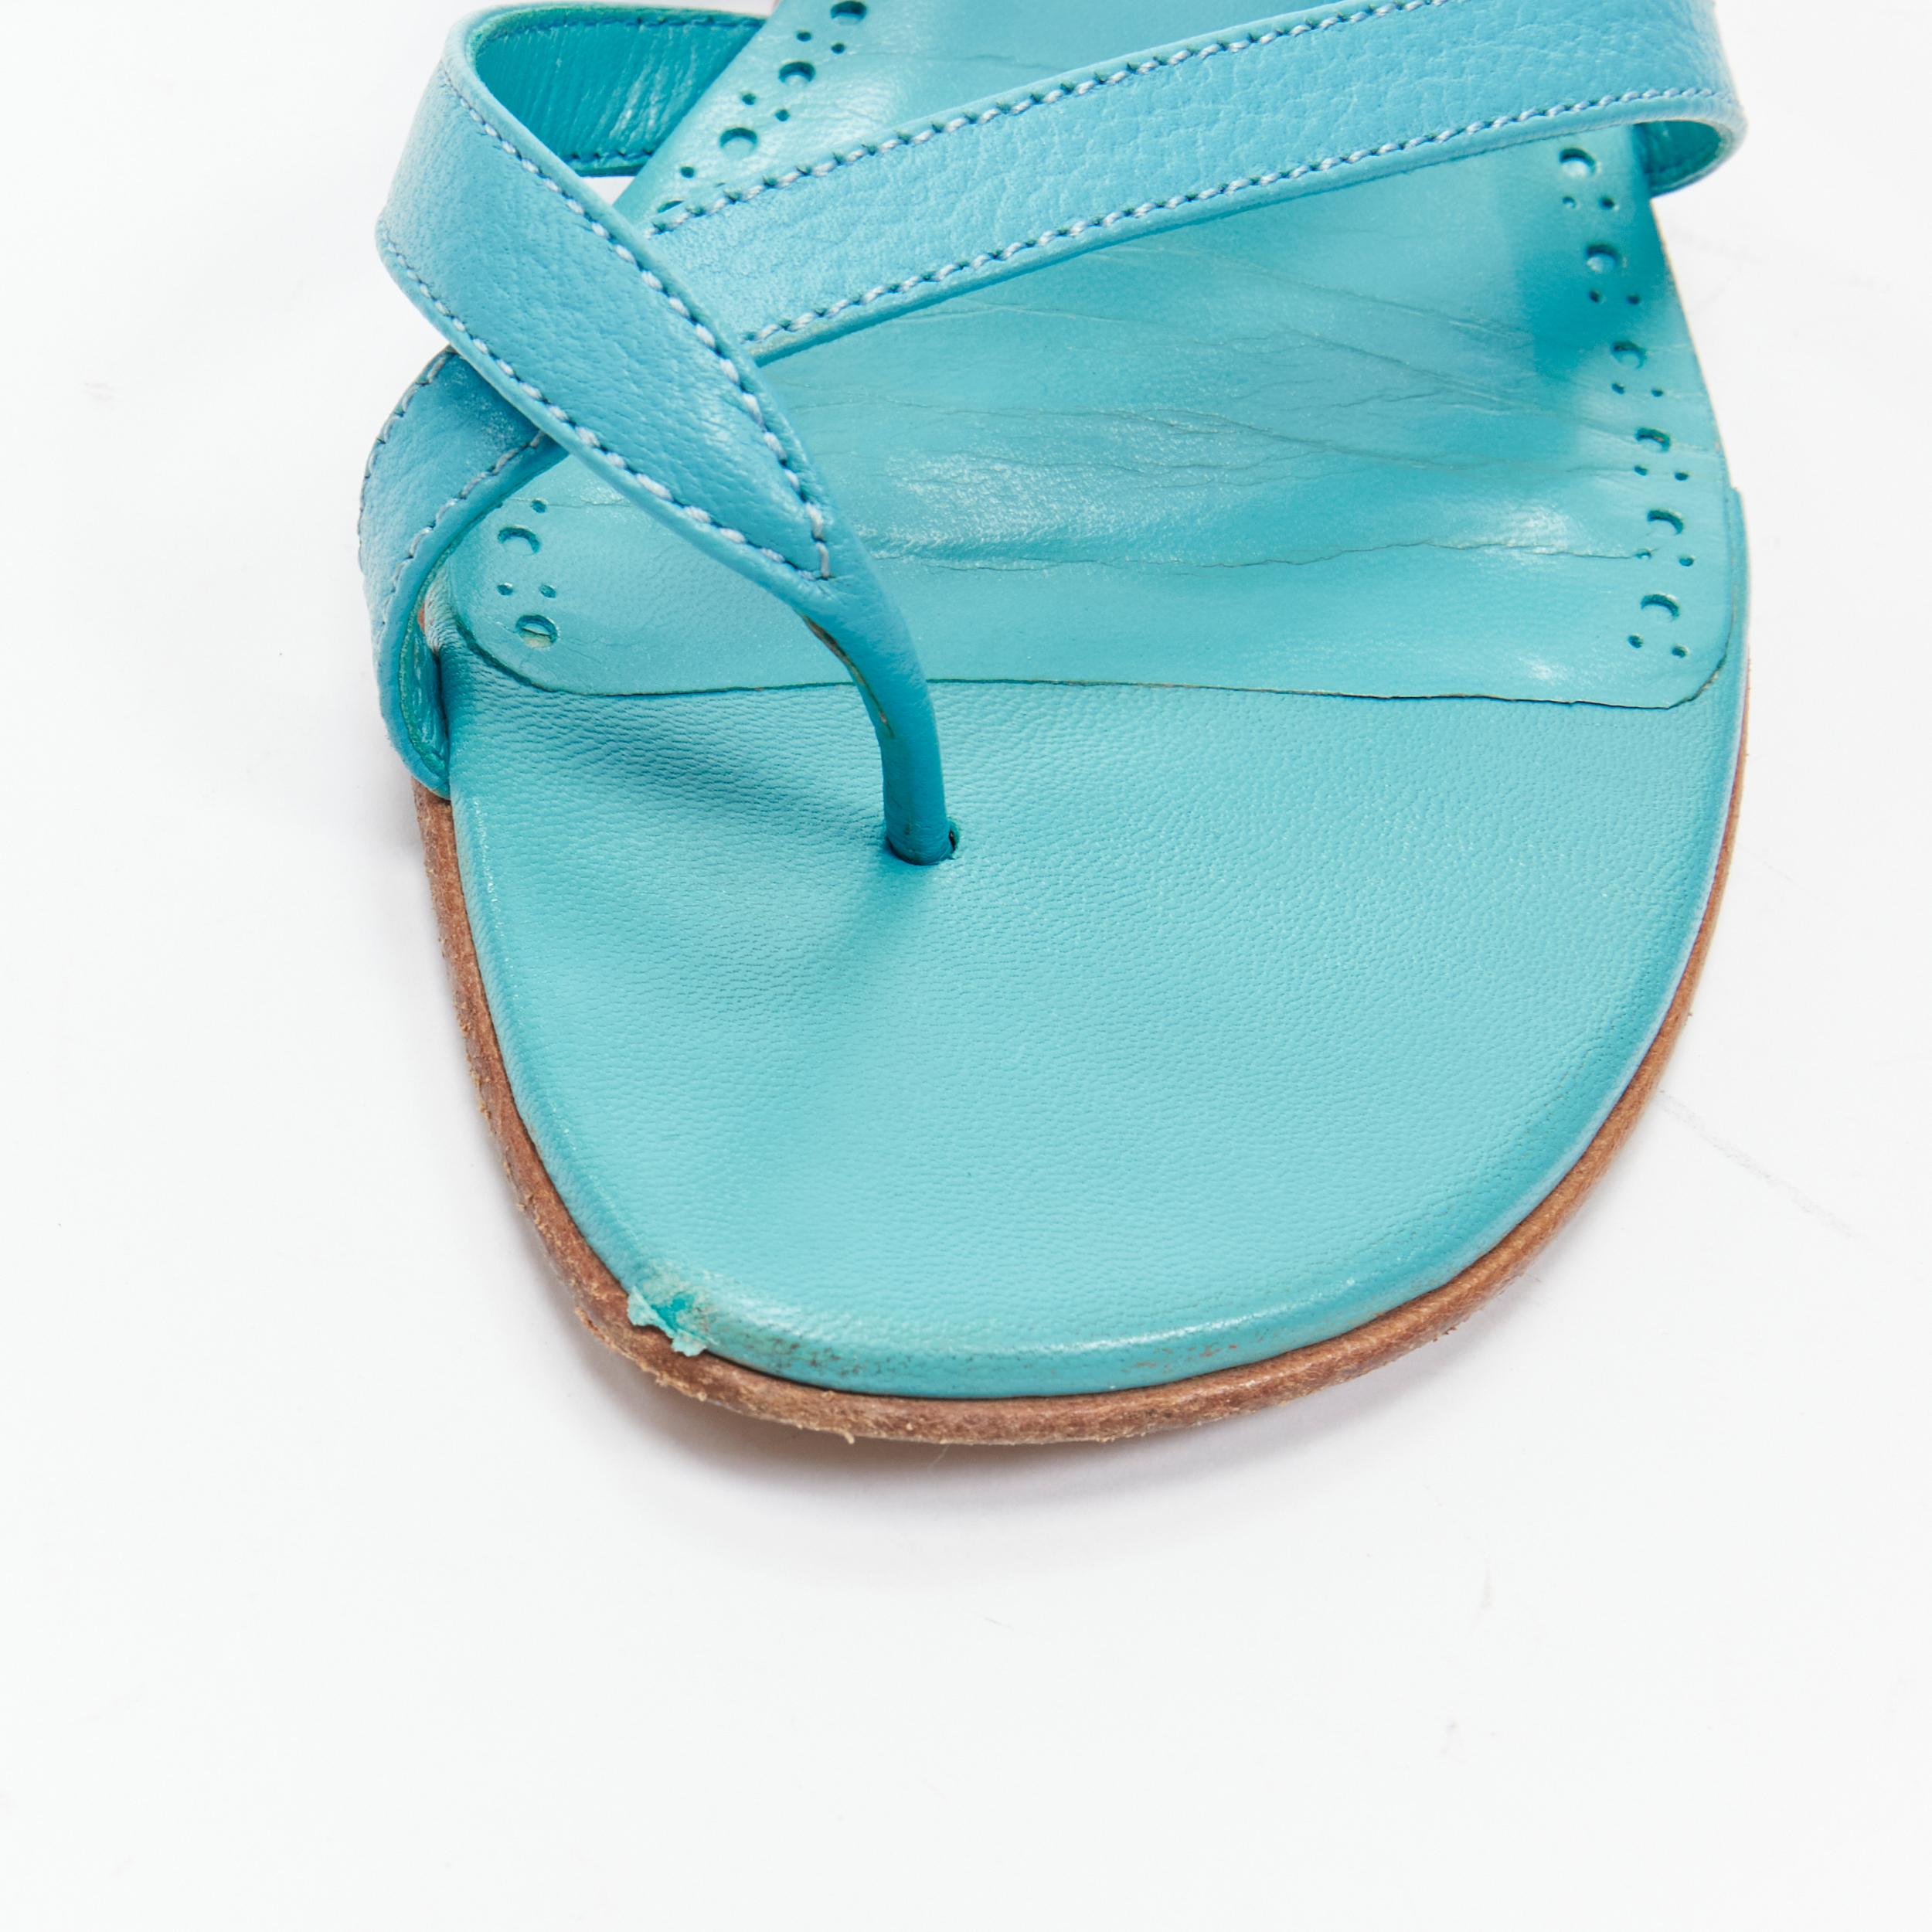 MANOLO BLAHNIK teal blue toe ring crisscross leather strappy sandals EU37.5 For Sale 6